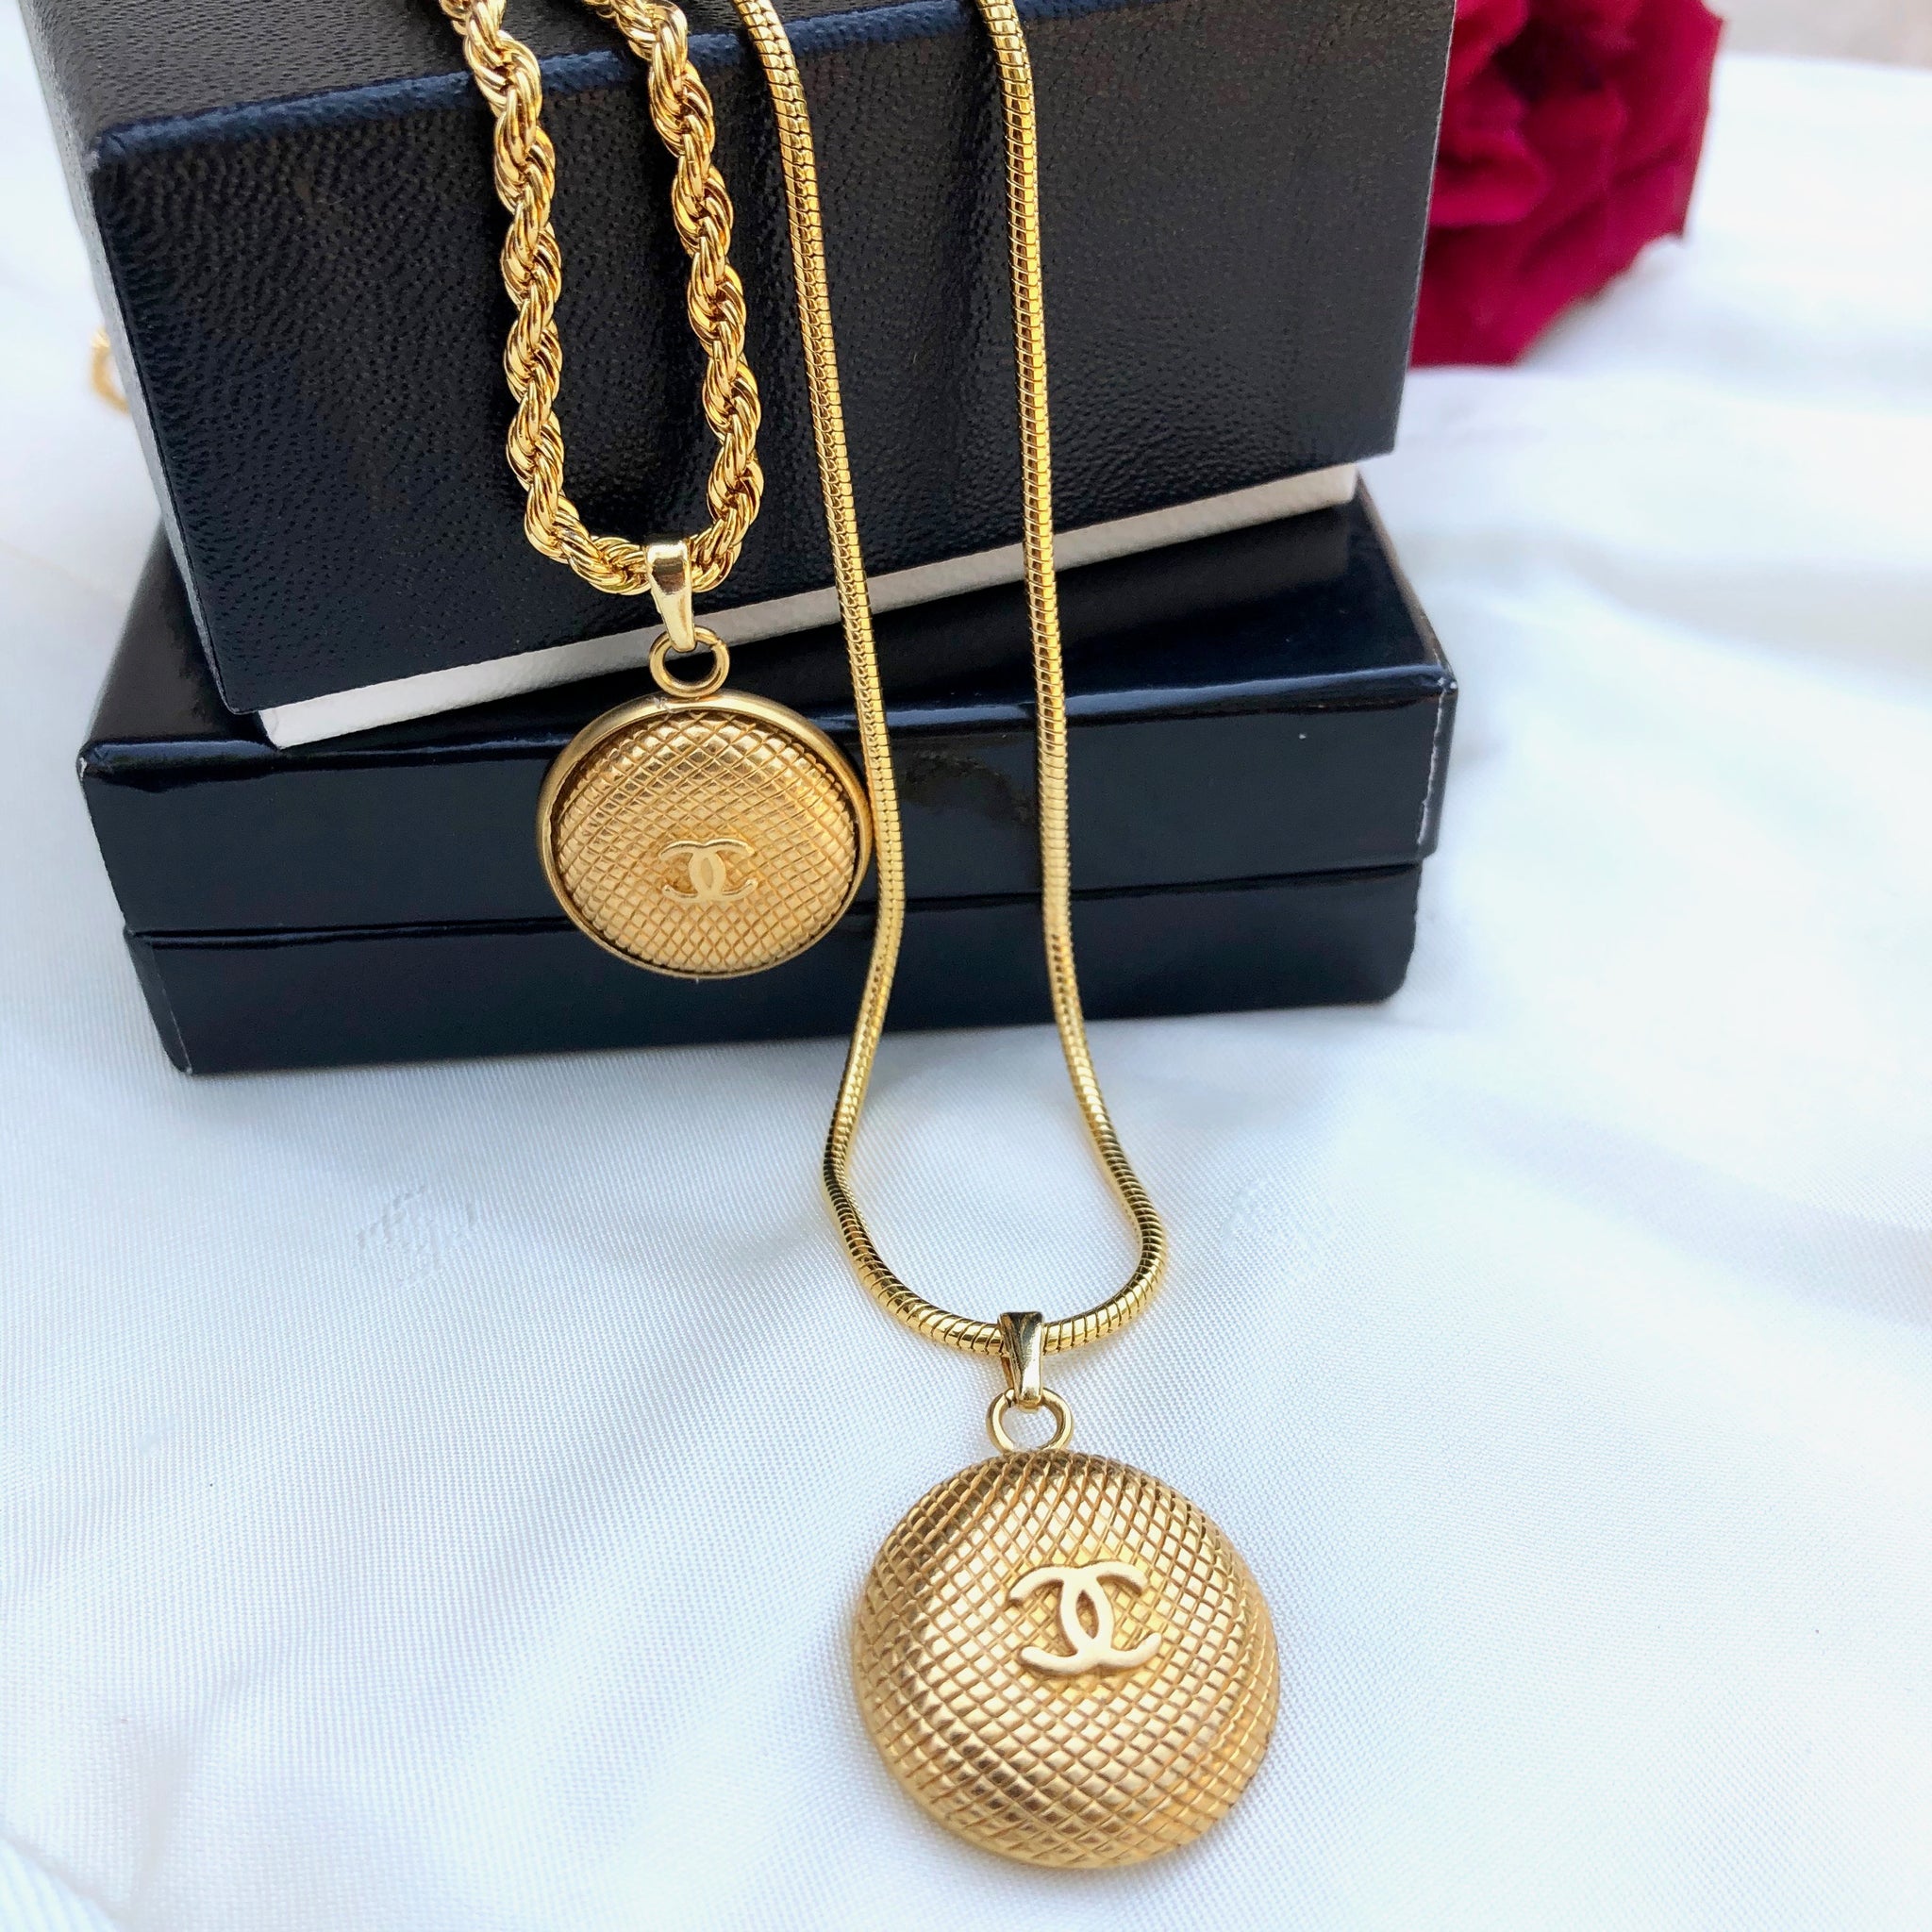 Chanel Button Jewelry